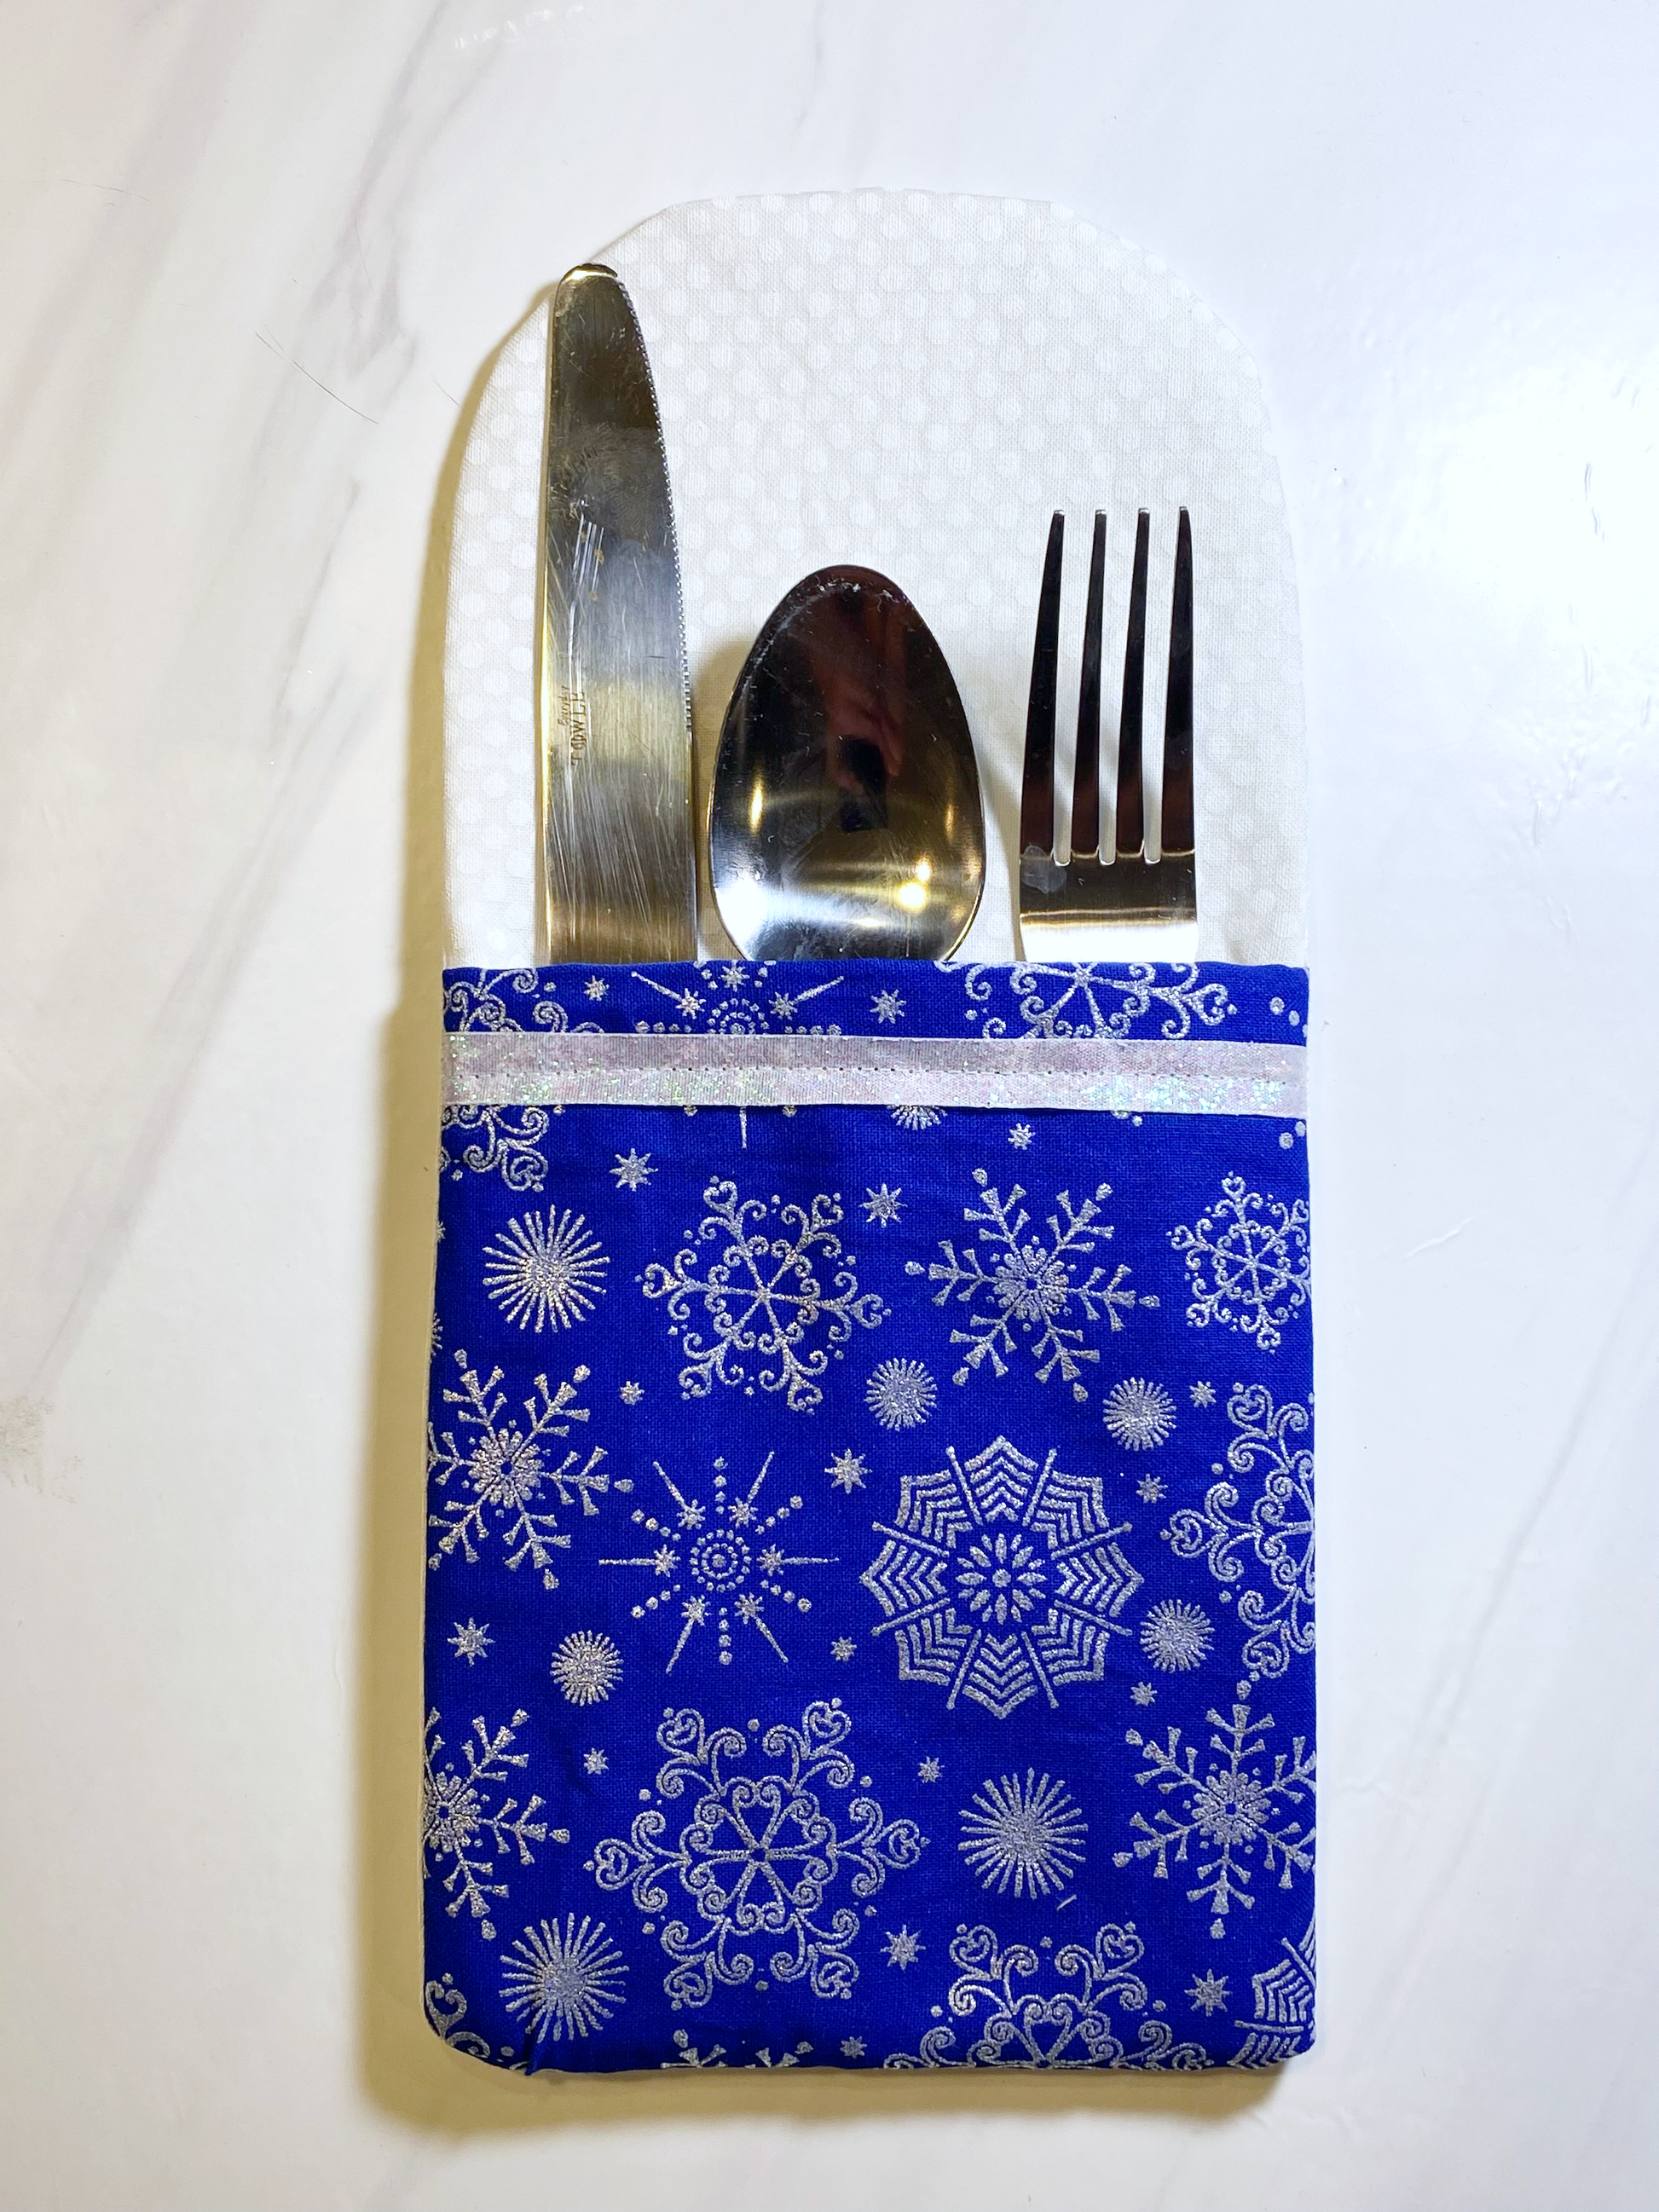 learn to sew a cutlery silverware holder using fabric, easy sewing pattern, pdf sewing pattern, table decor, decoration, easy christmas sewing patterns